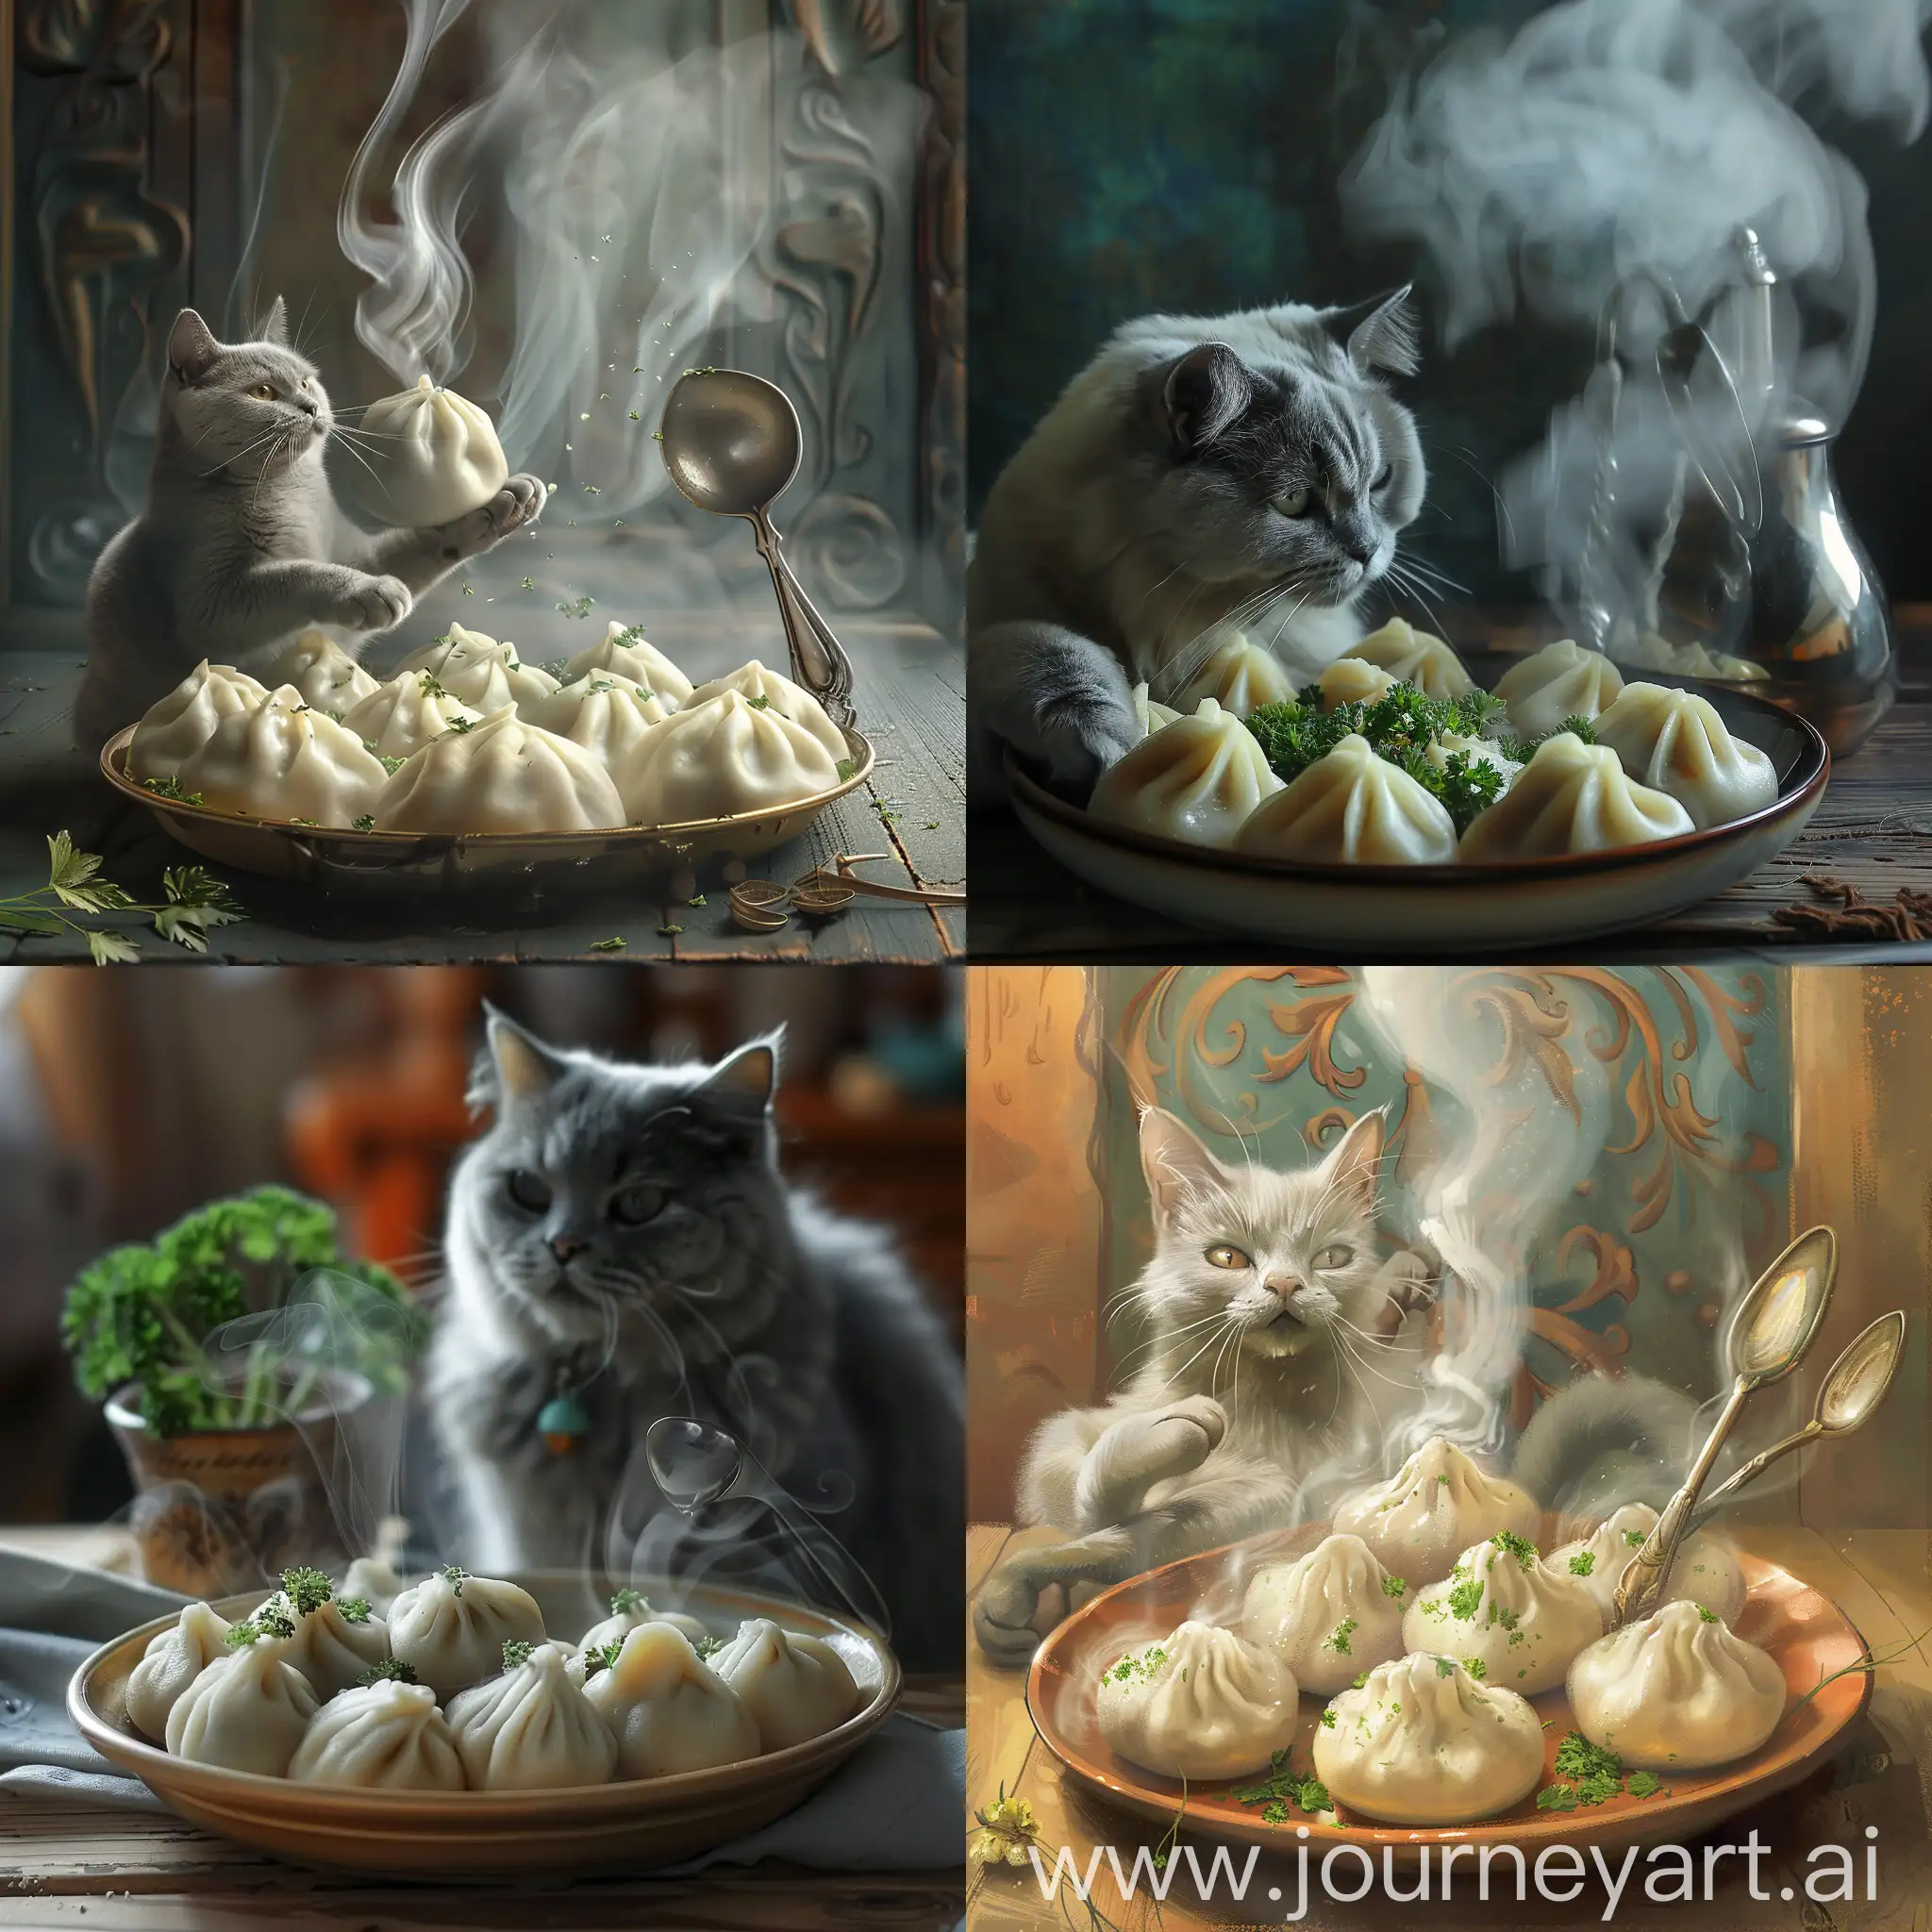 Steaming-Georgian-Khinkali-Dumplings-with-a-Curious-Cat-Holding-a-Spoon